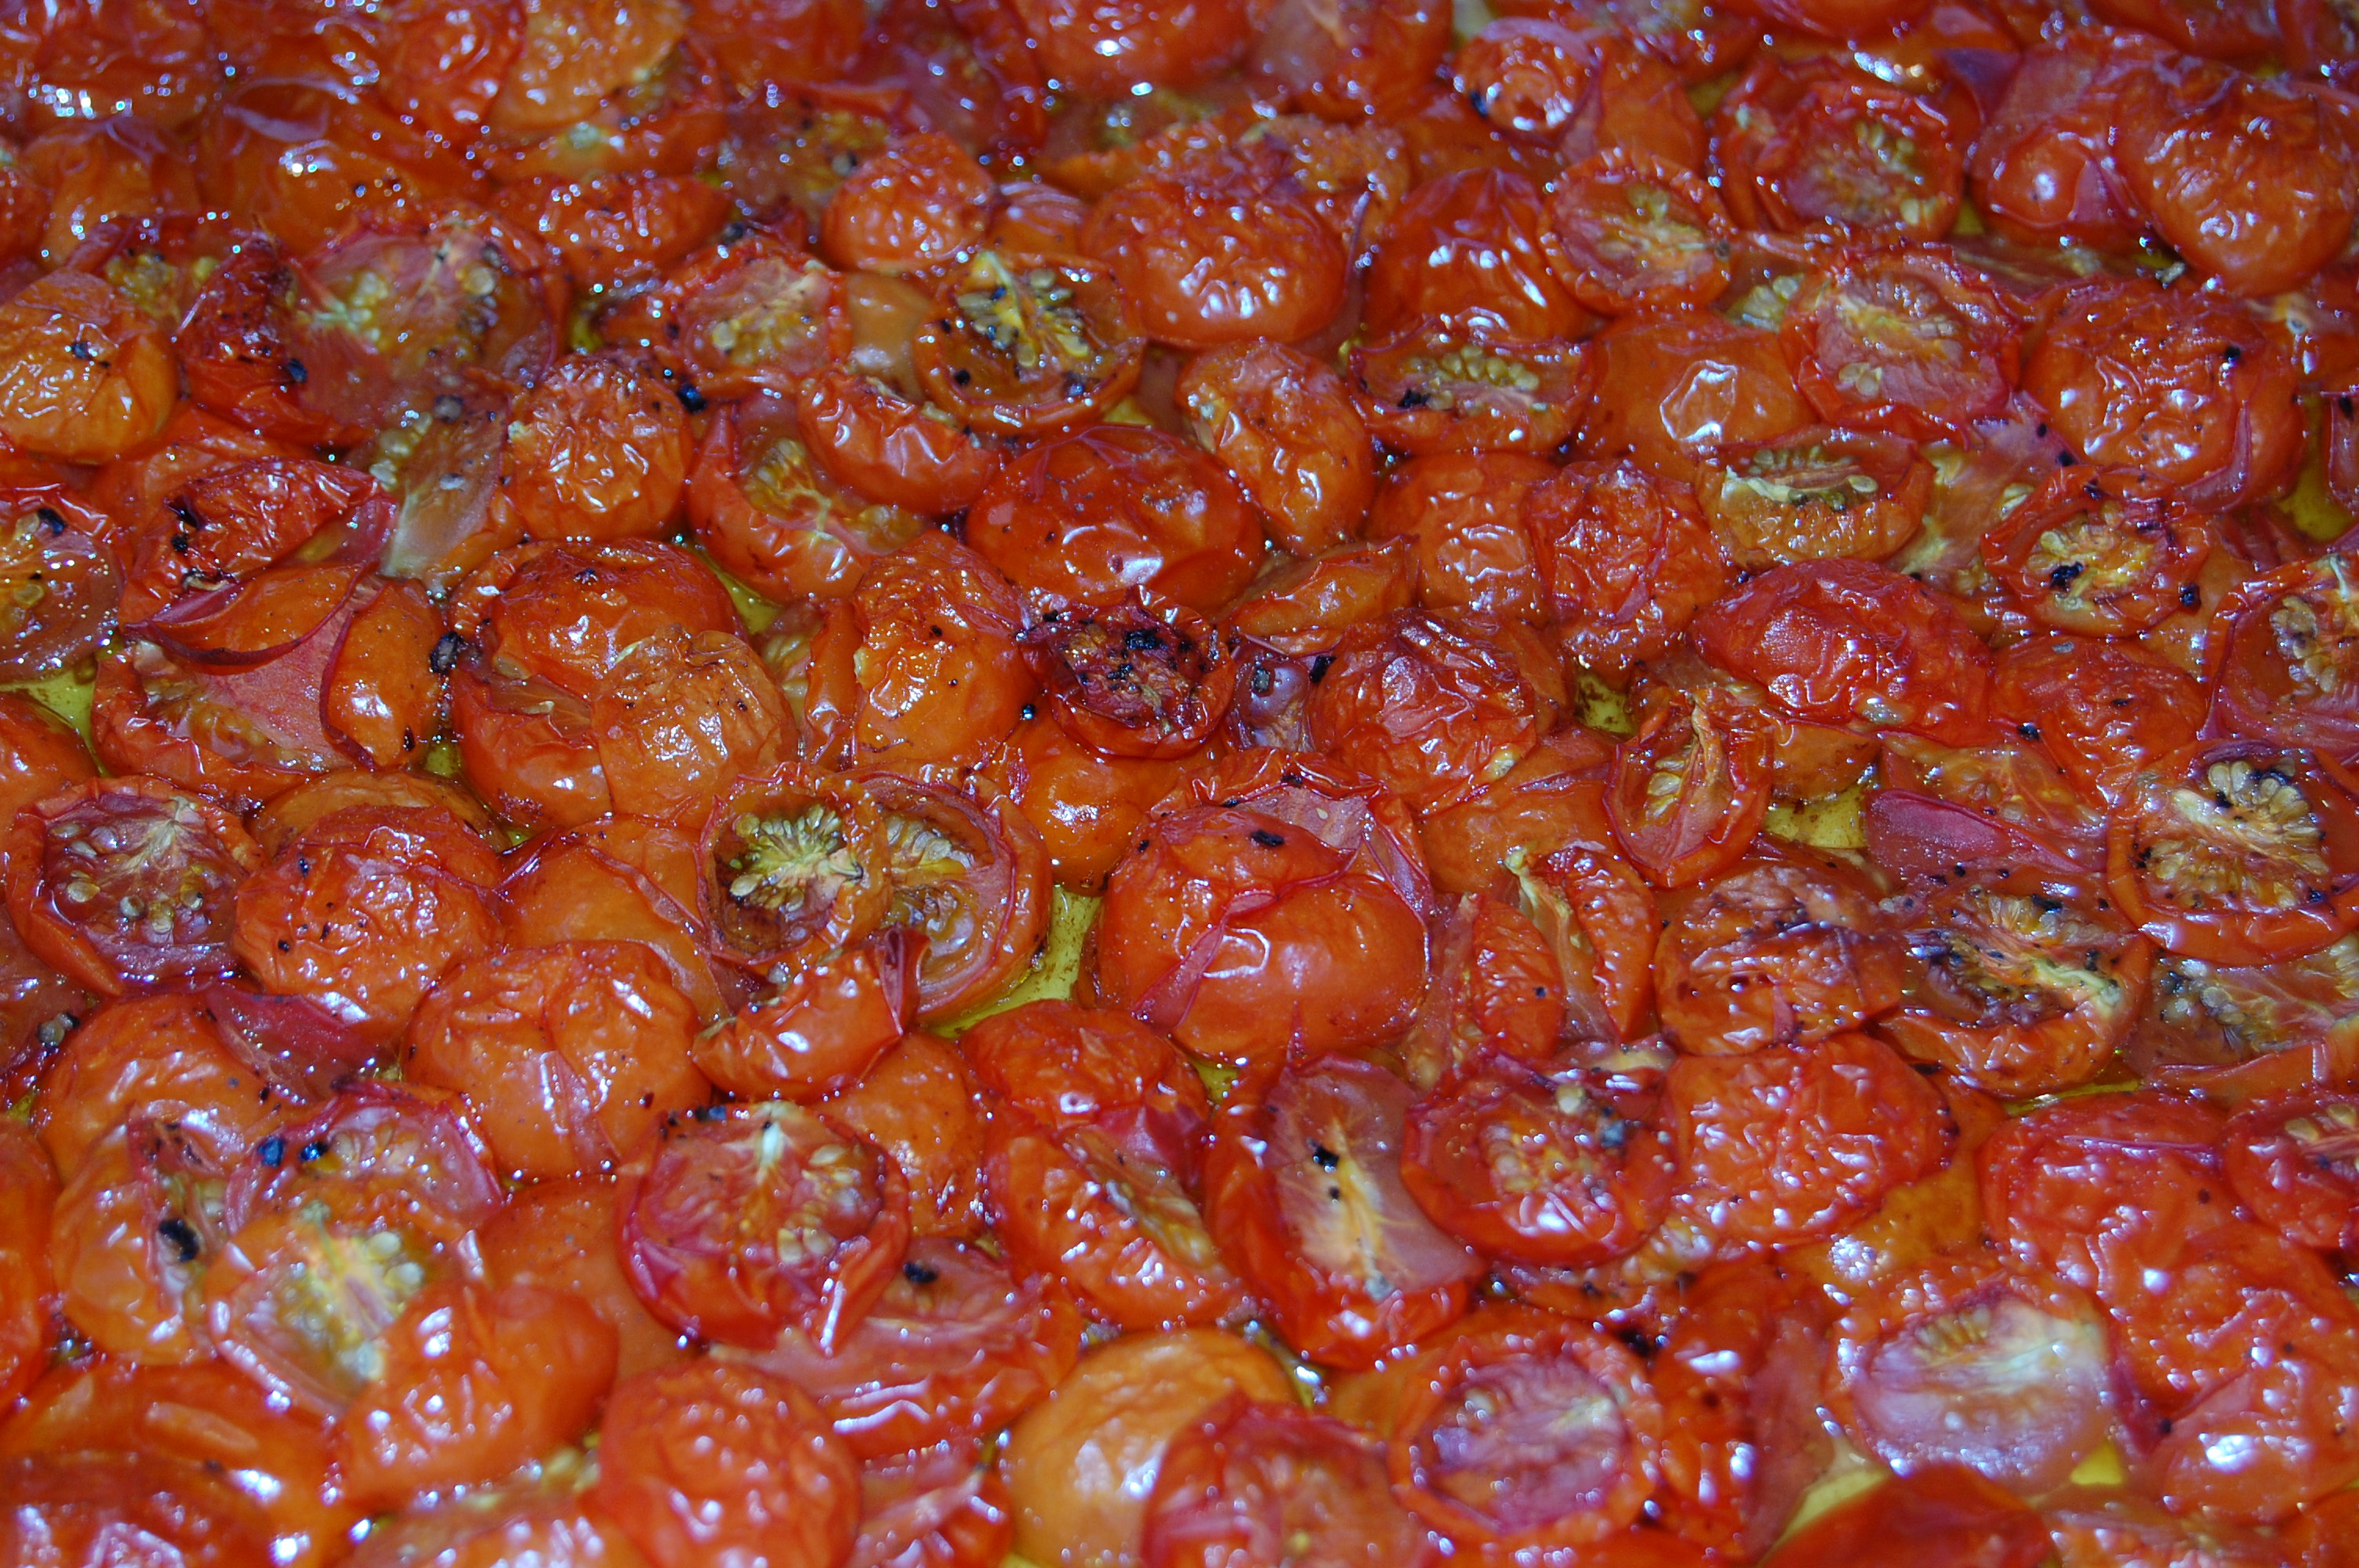 Spoon the hot tomatoes with